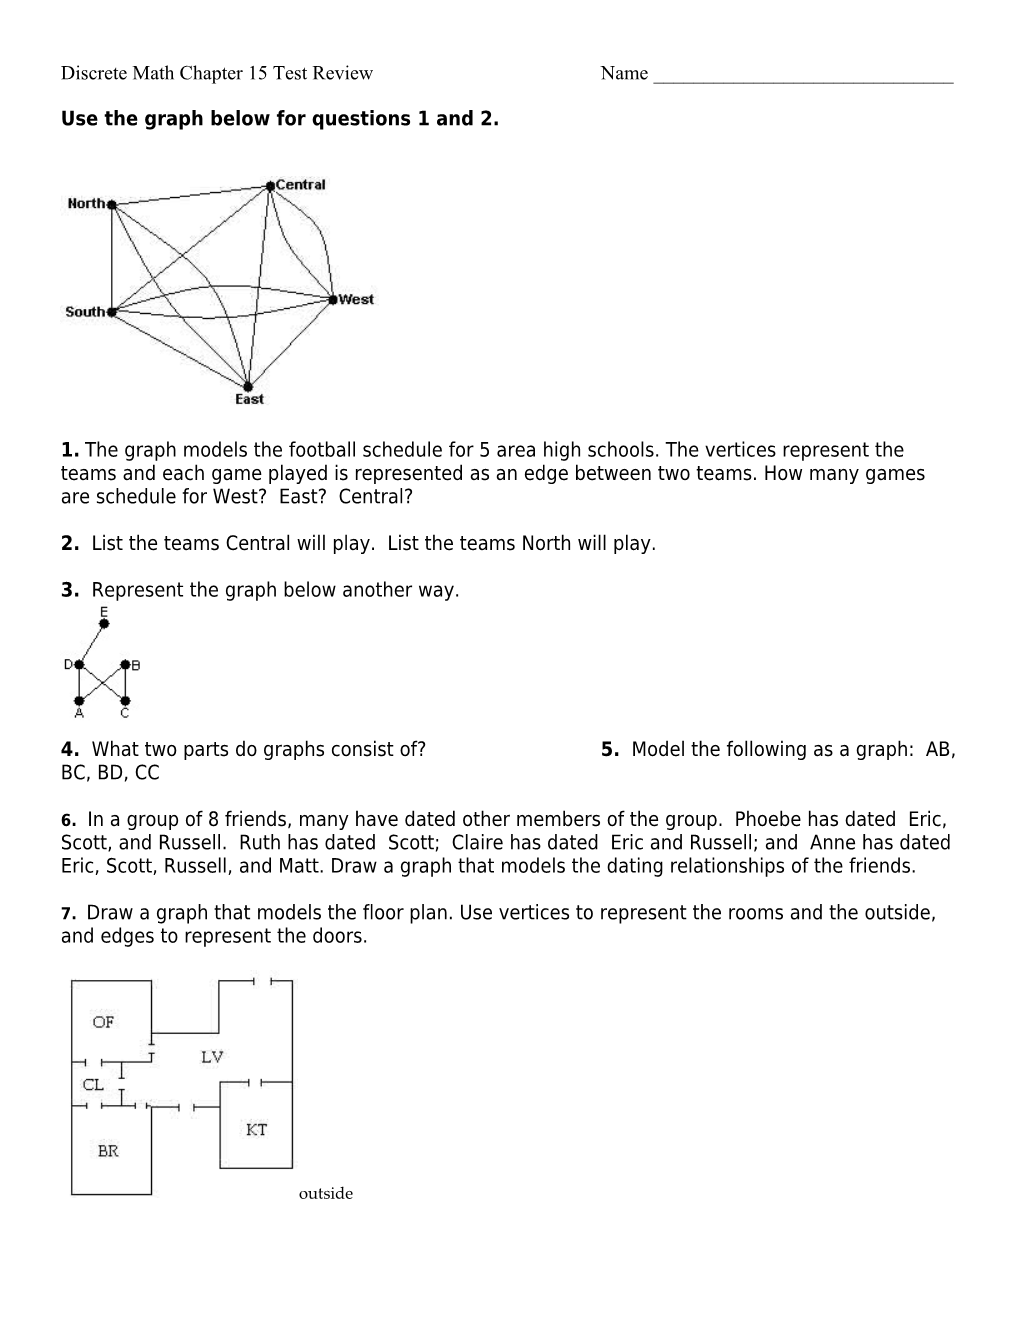 Discrete Math Chapter 15 Test Review